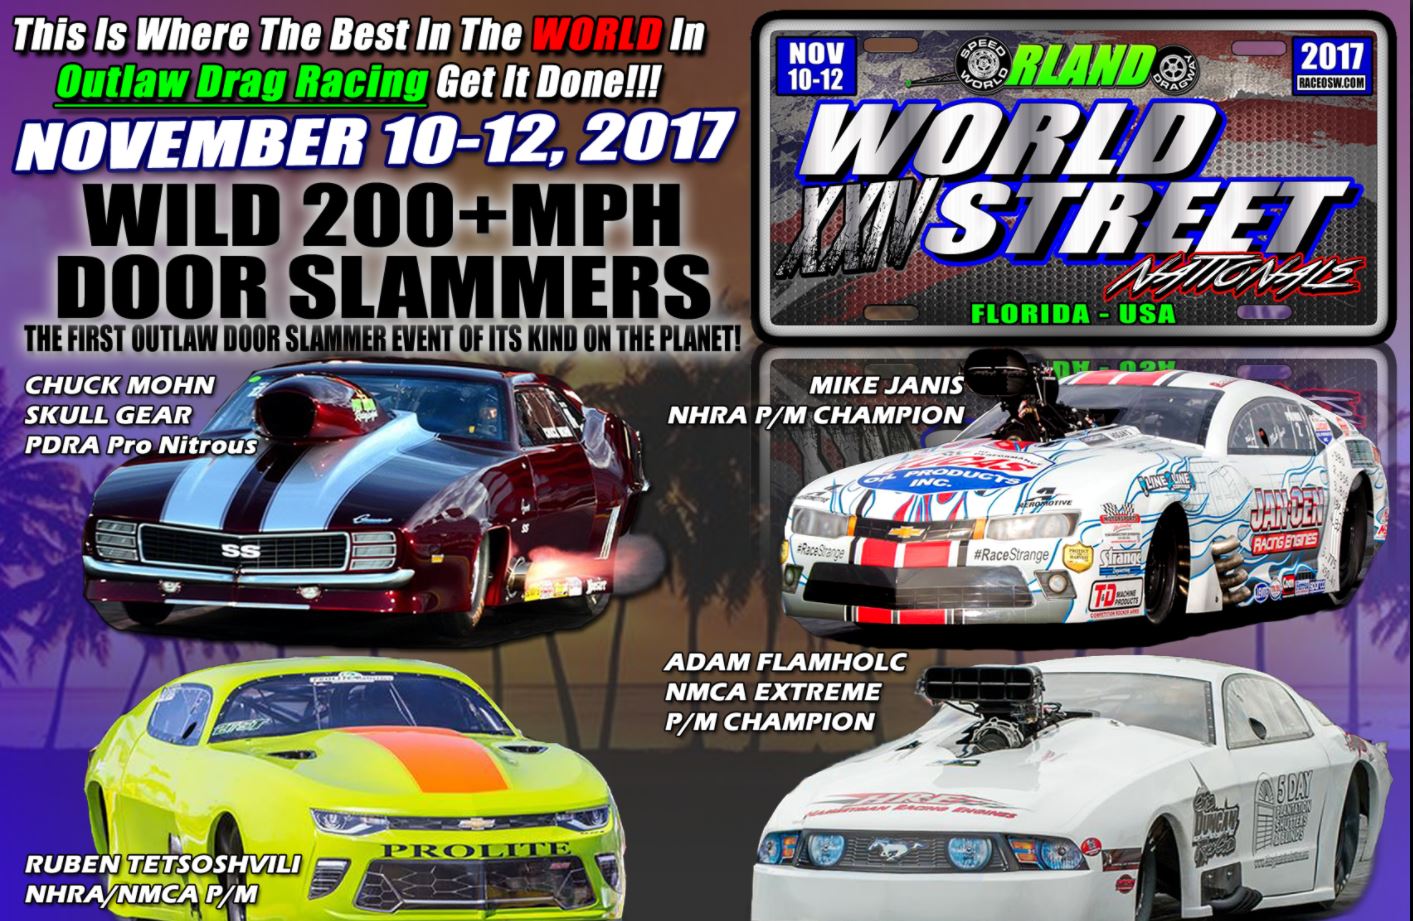 Watch The World Street Nationals From Orlando LIVE RIGHT